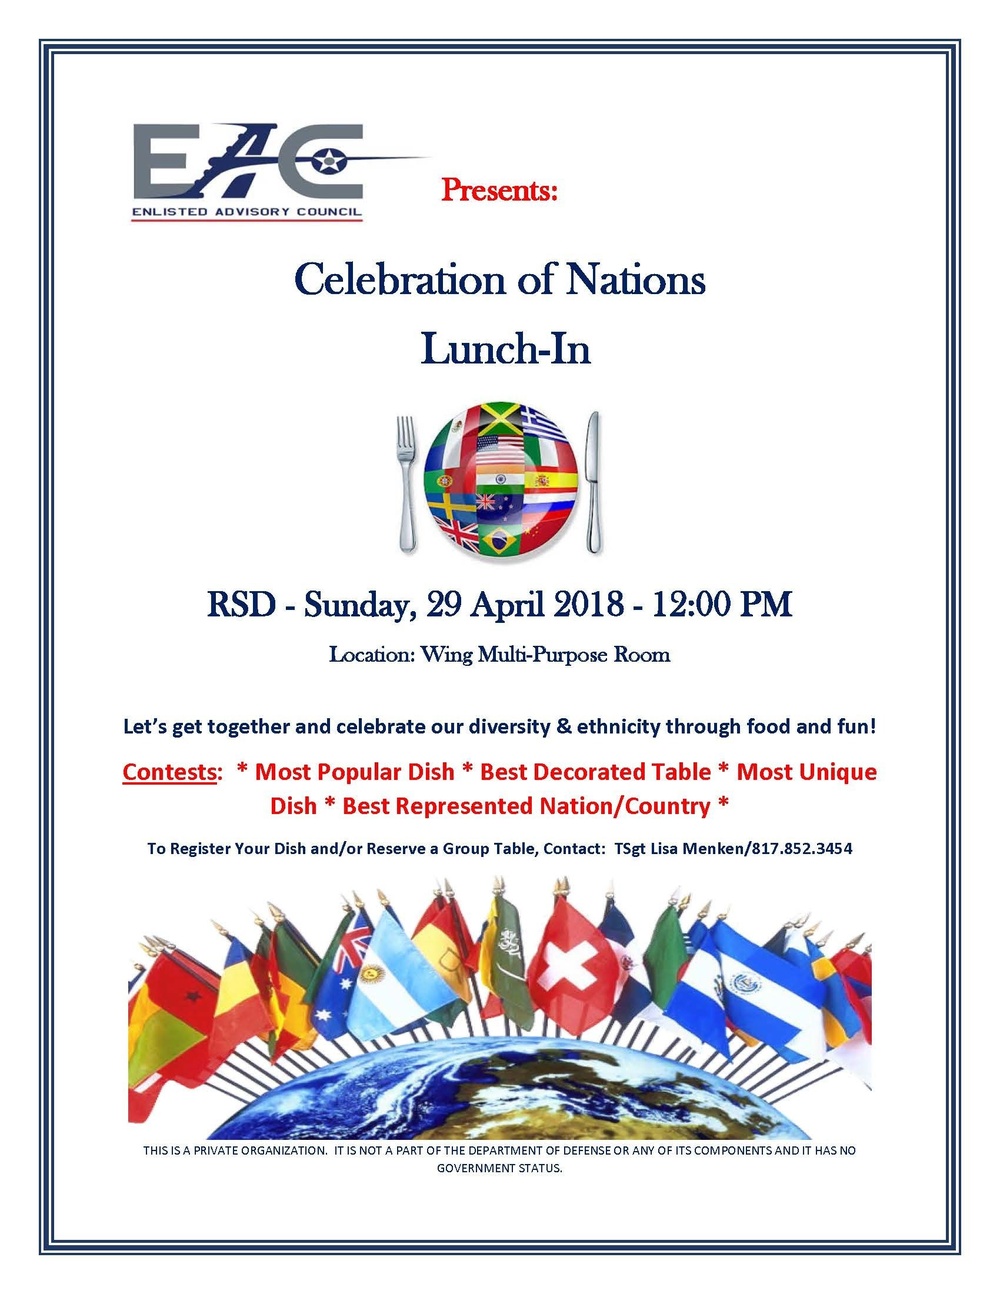 Celebration of Nations Lunch-in